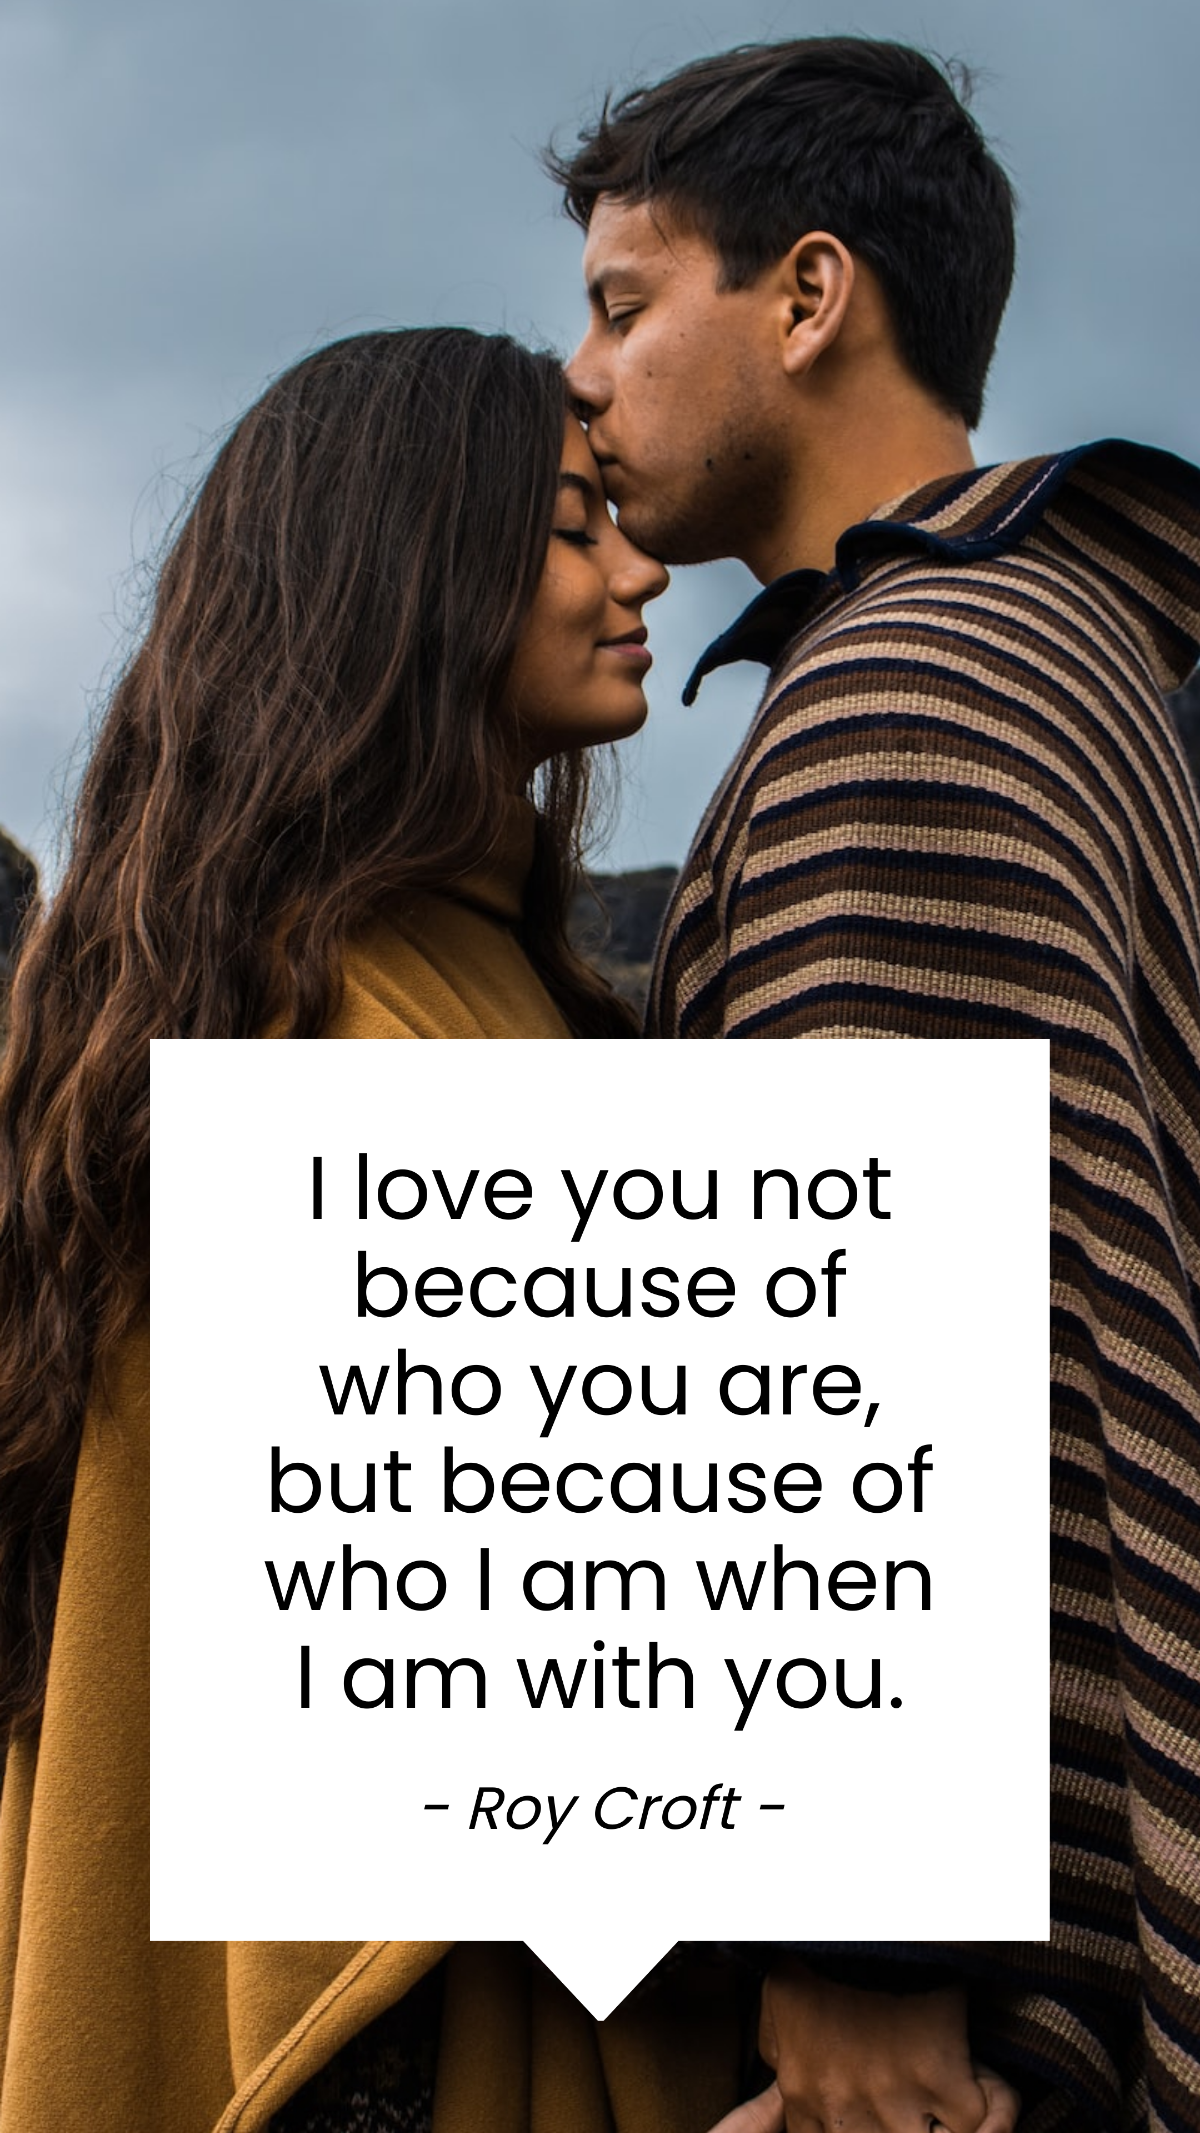 Roy Croft - I love you not because of who you are, but because of who I am when I am with you. Template